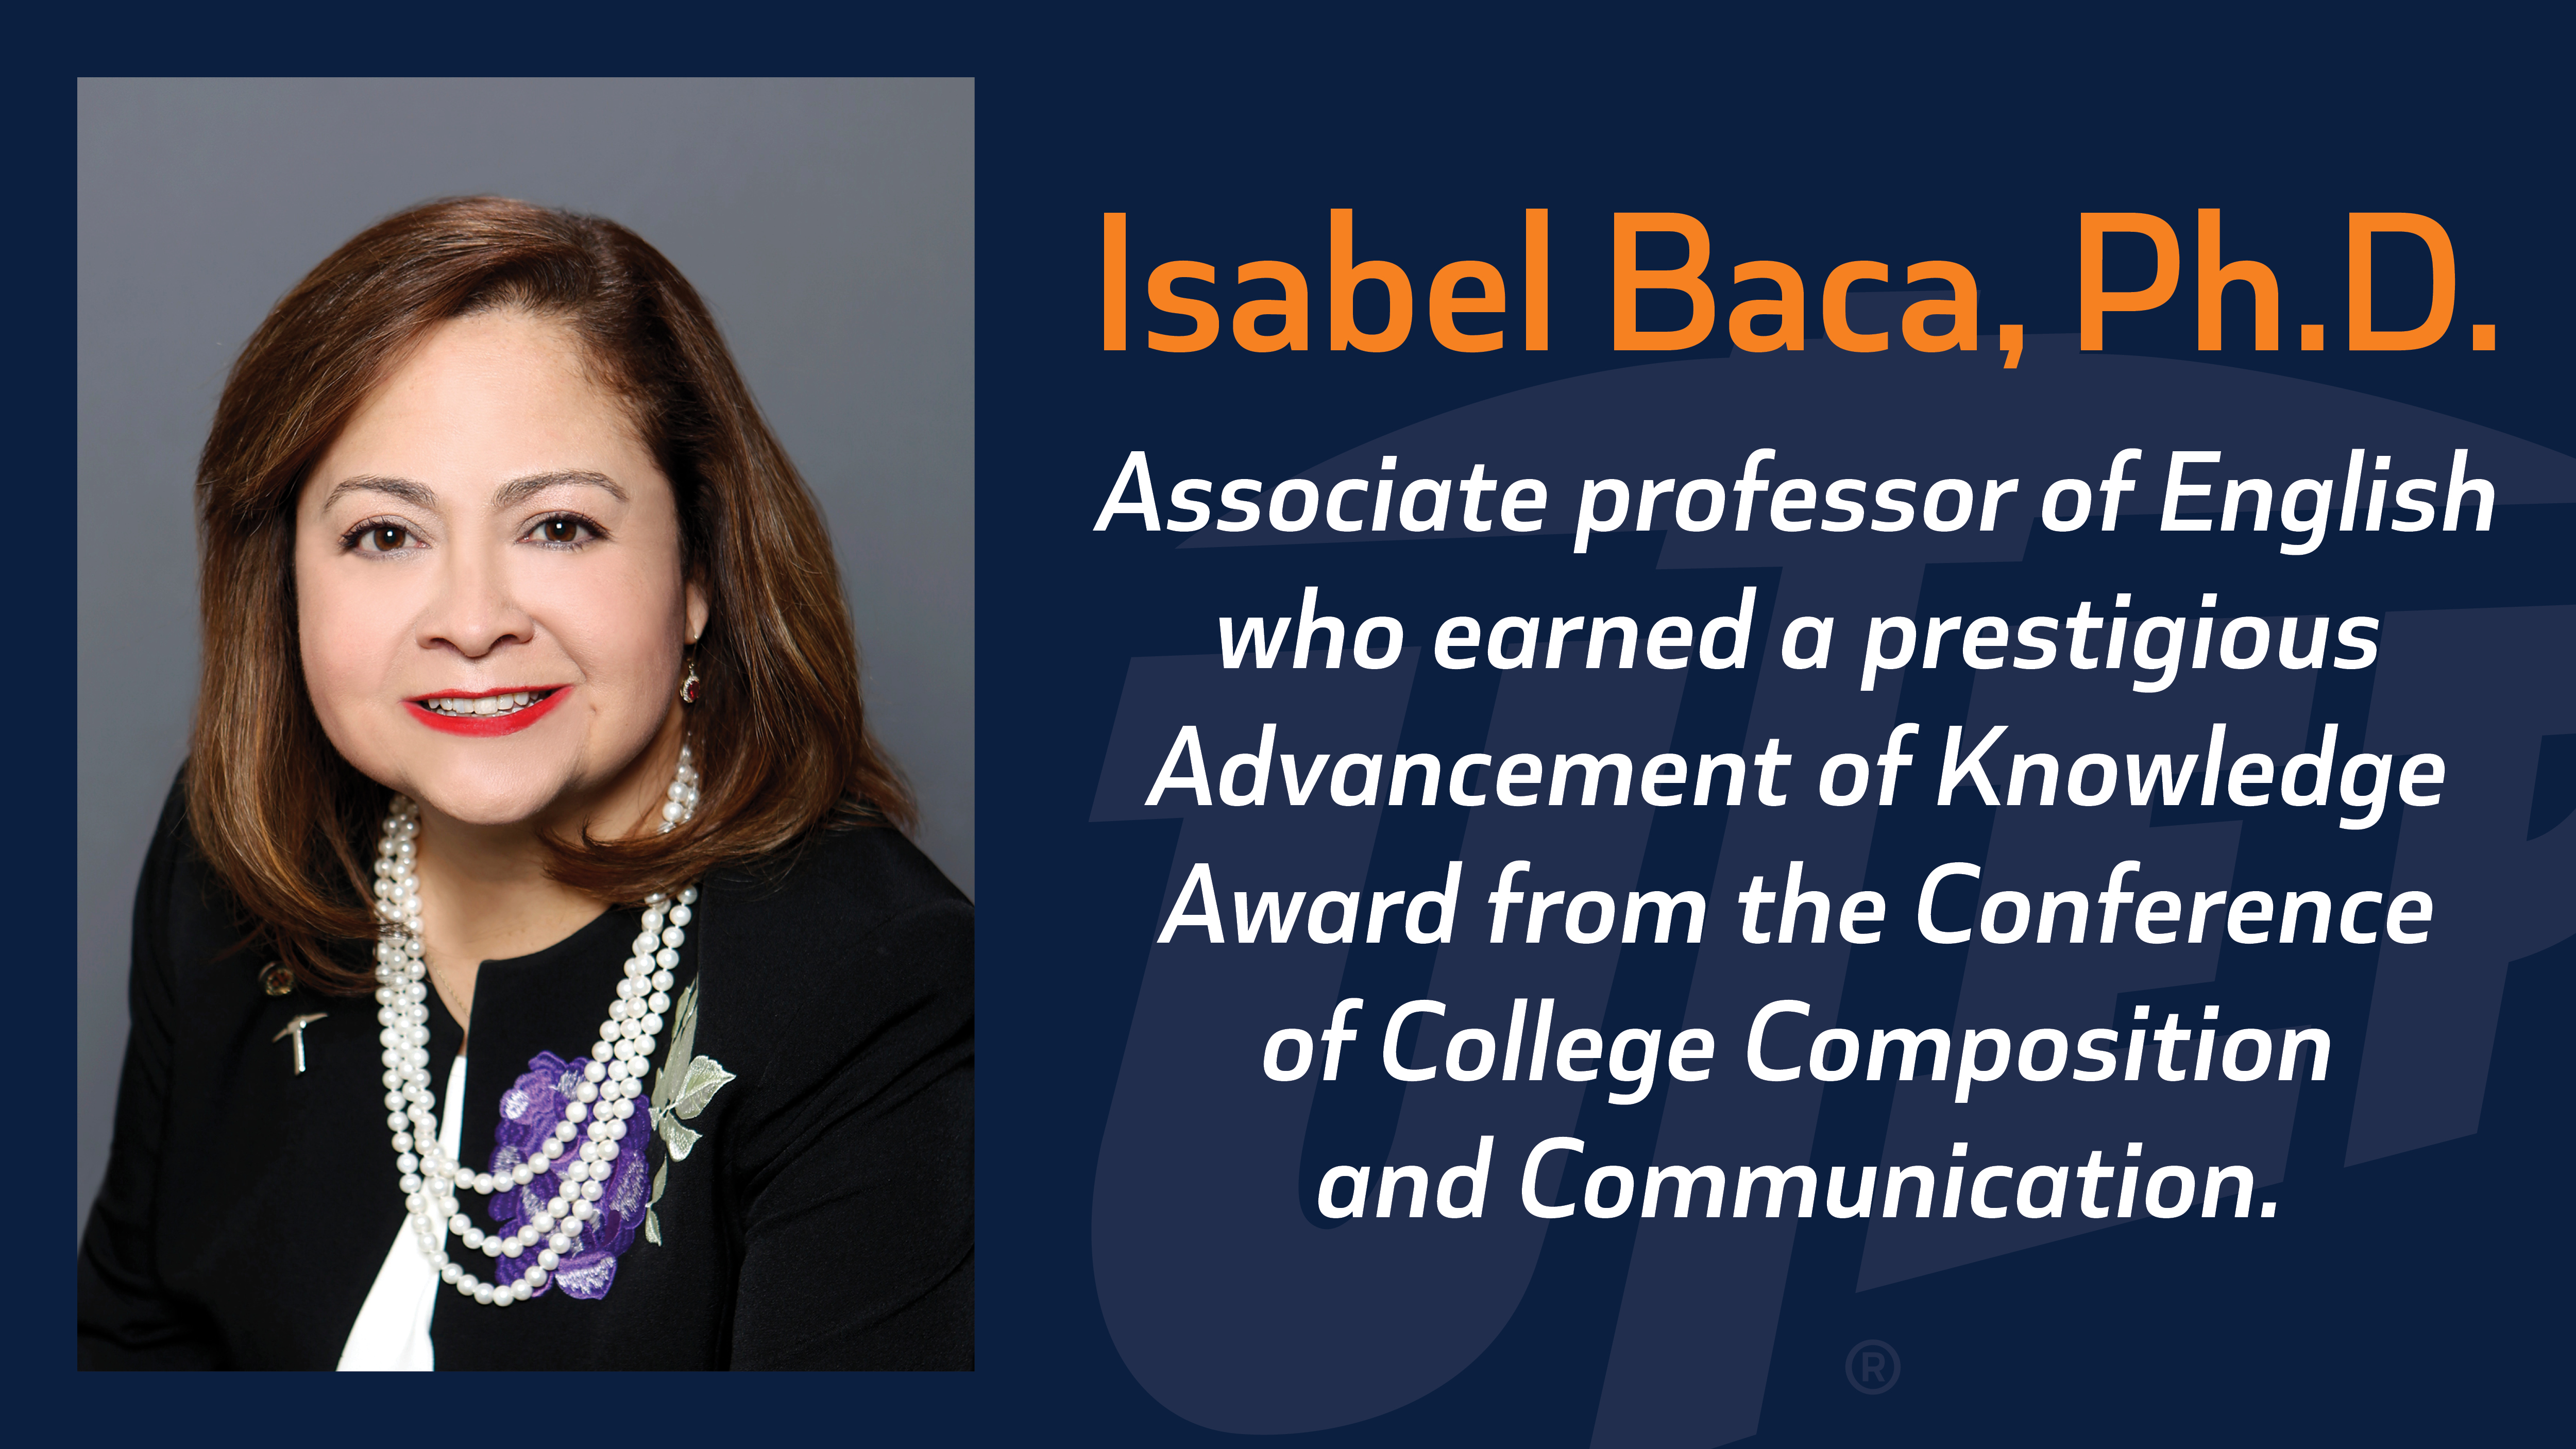 Isabel Baca, Ph.D., associate professor of English at The University of Texas at El Paso, recently earned a prestigious Advancement of Knowledge Award from the Conference of College Composition and Communication for a book she helped edit that promotes inclusive writing studies that will foster Latinx student success.   